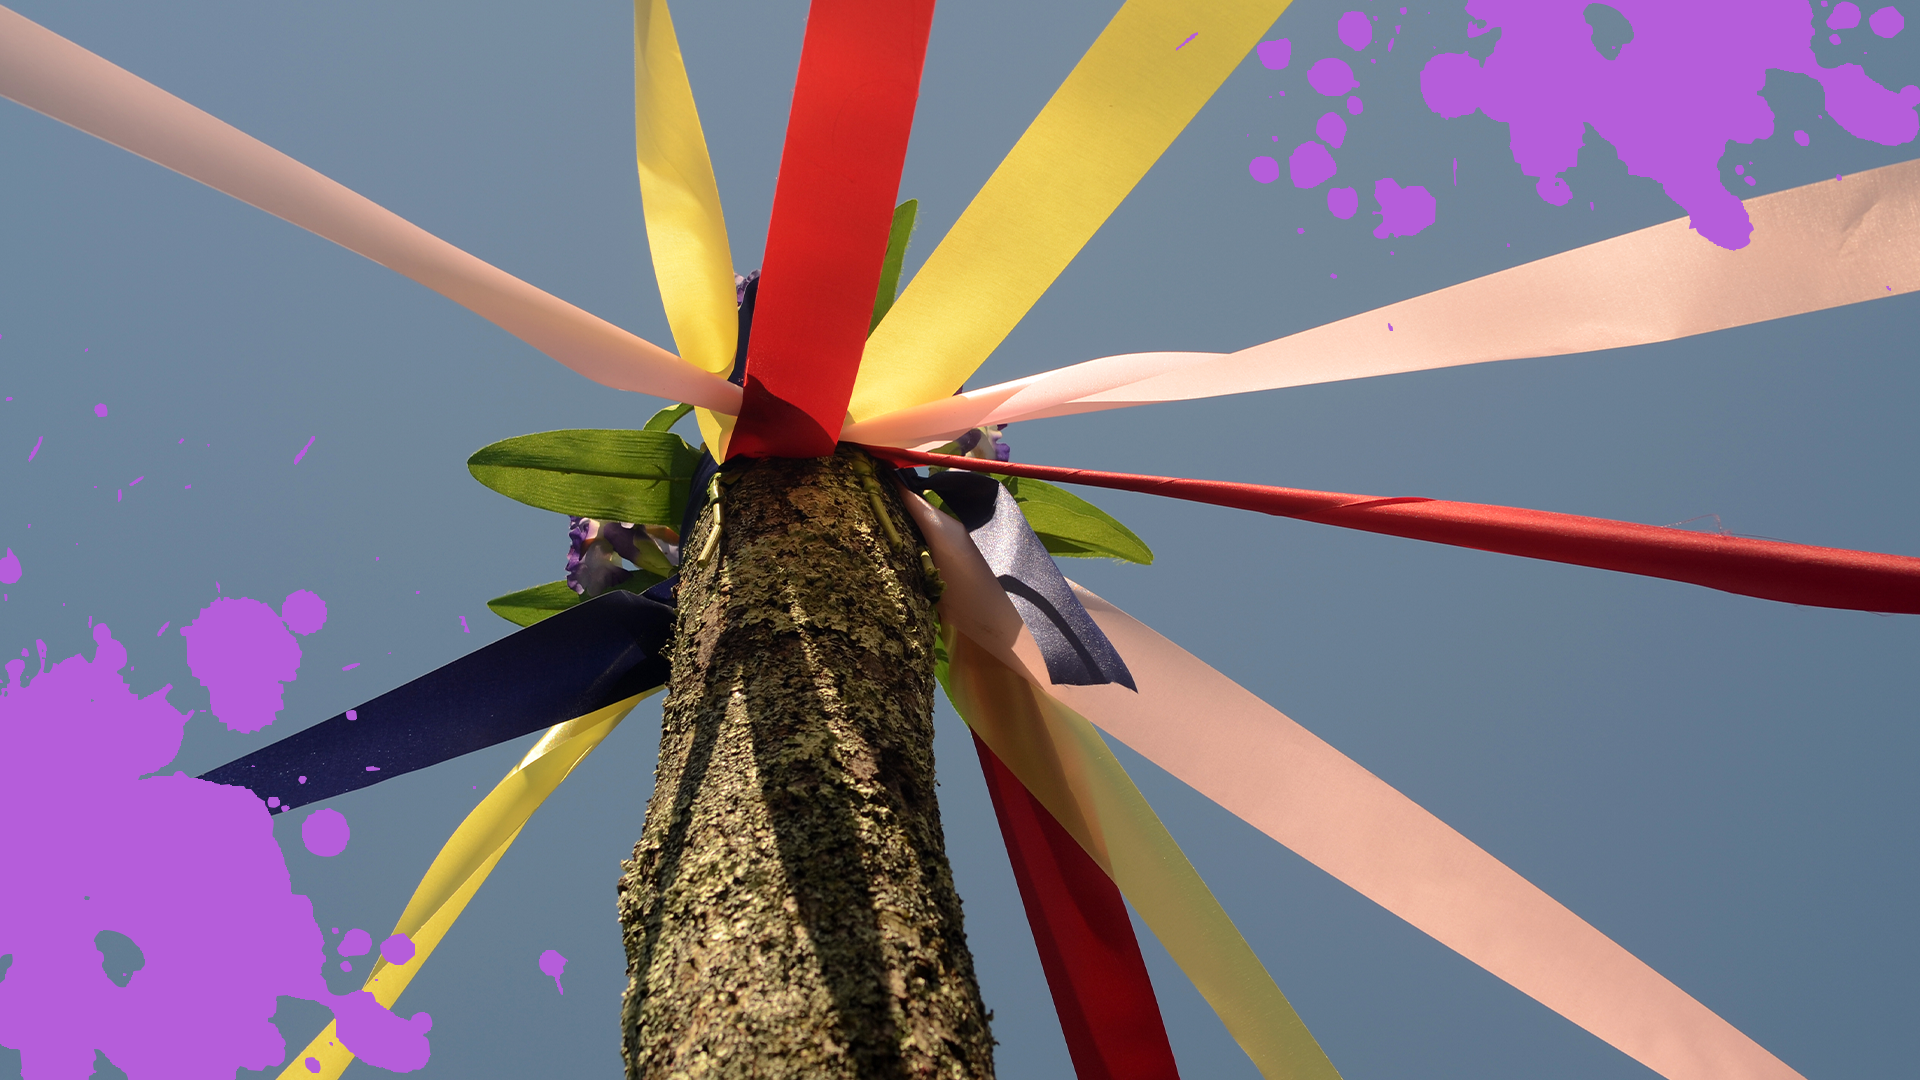 Pole with ribbons and splats